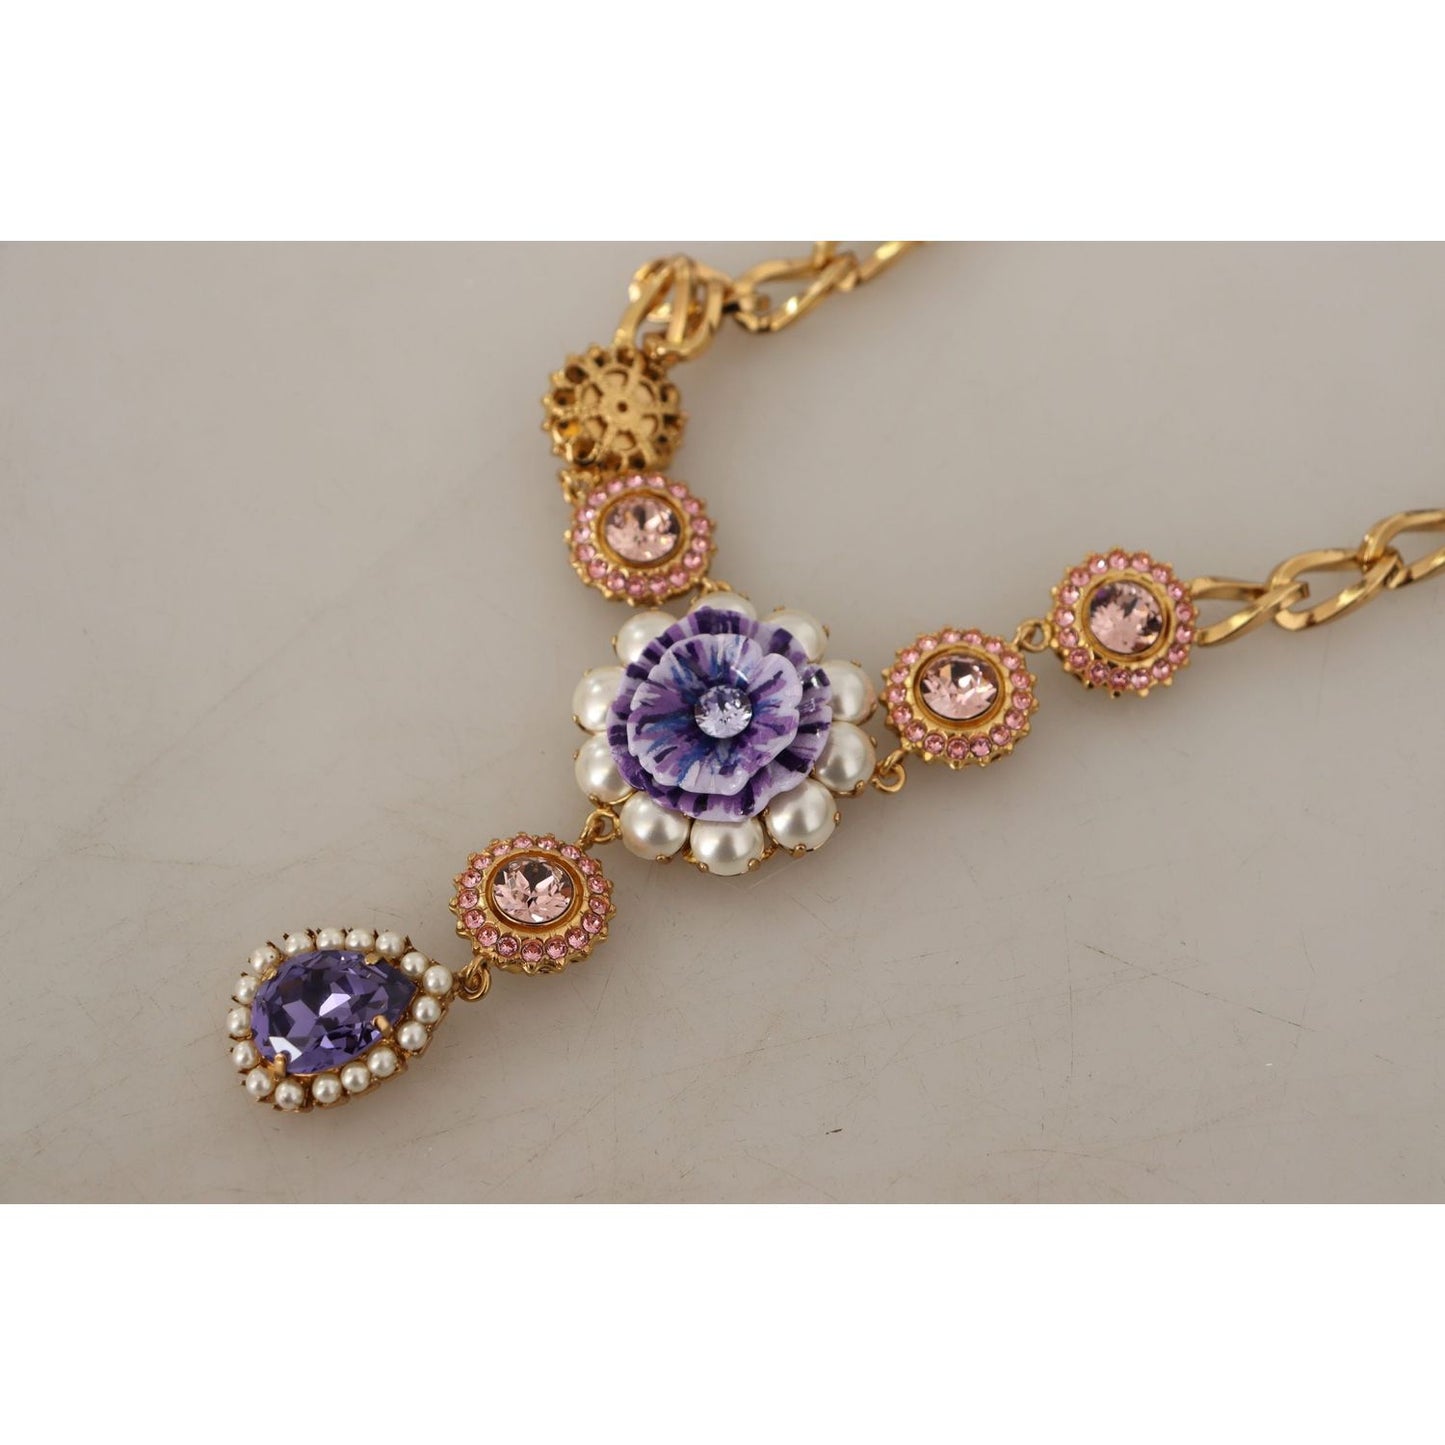 Dolce & Gabbana Elegant Floral Crystal Statement Necklace gold-brass-crystal-purple-pink-pearl-pendants-necklace WOMAN NECKLACE IMG_1965-scaled-fe77fed0-e0d.jpg